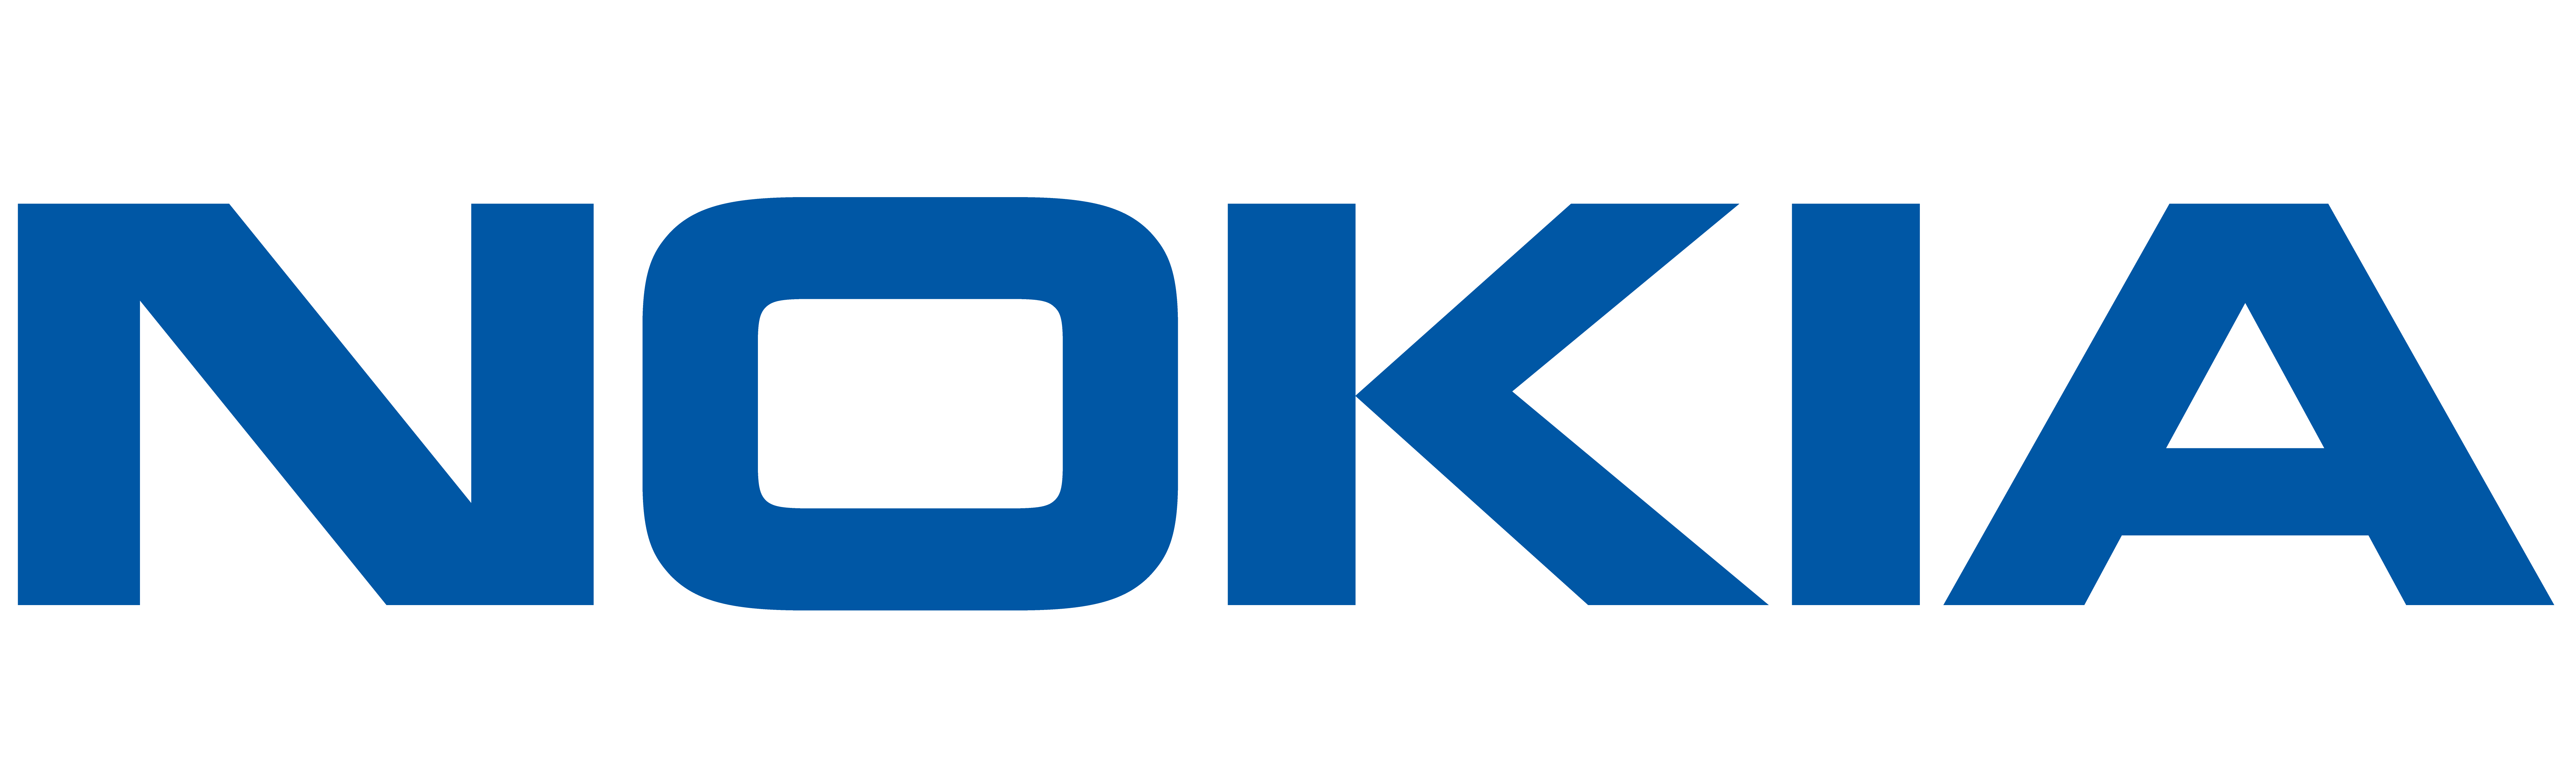 gallery images and information: nokia logo transparent back